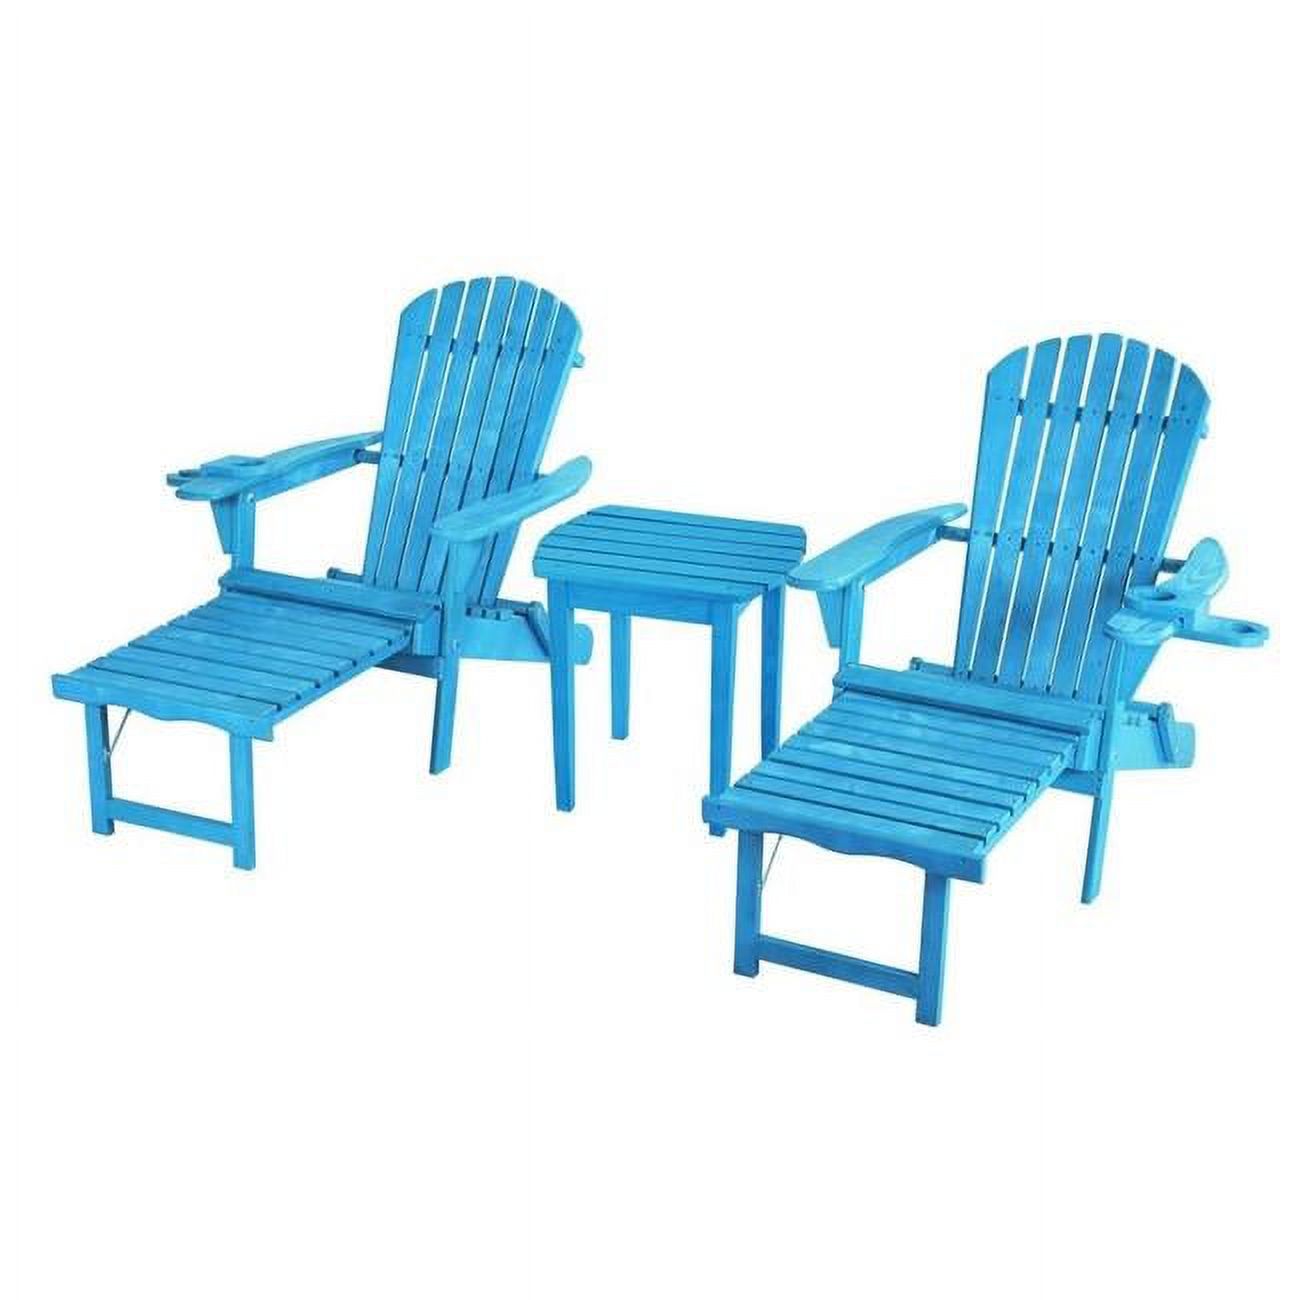 Oceanic Adirondack Chaise Foldable Lounge Chair Set with Cup & Glass Holder, Sky Blue - Set of 2 - image 1 of 1